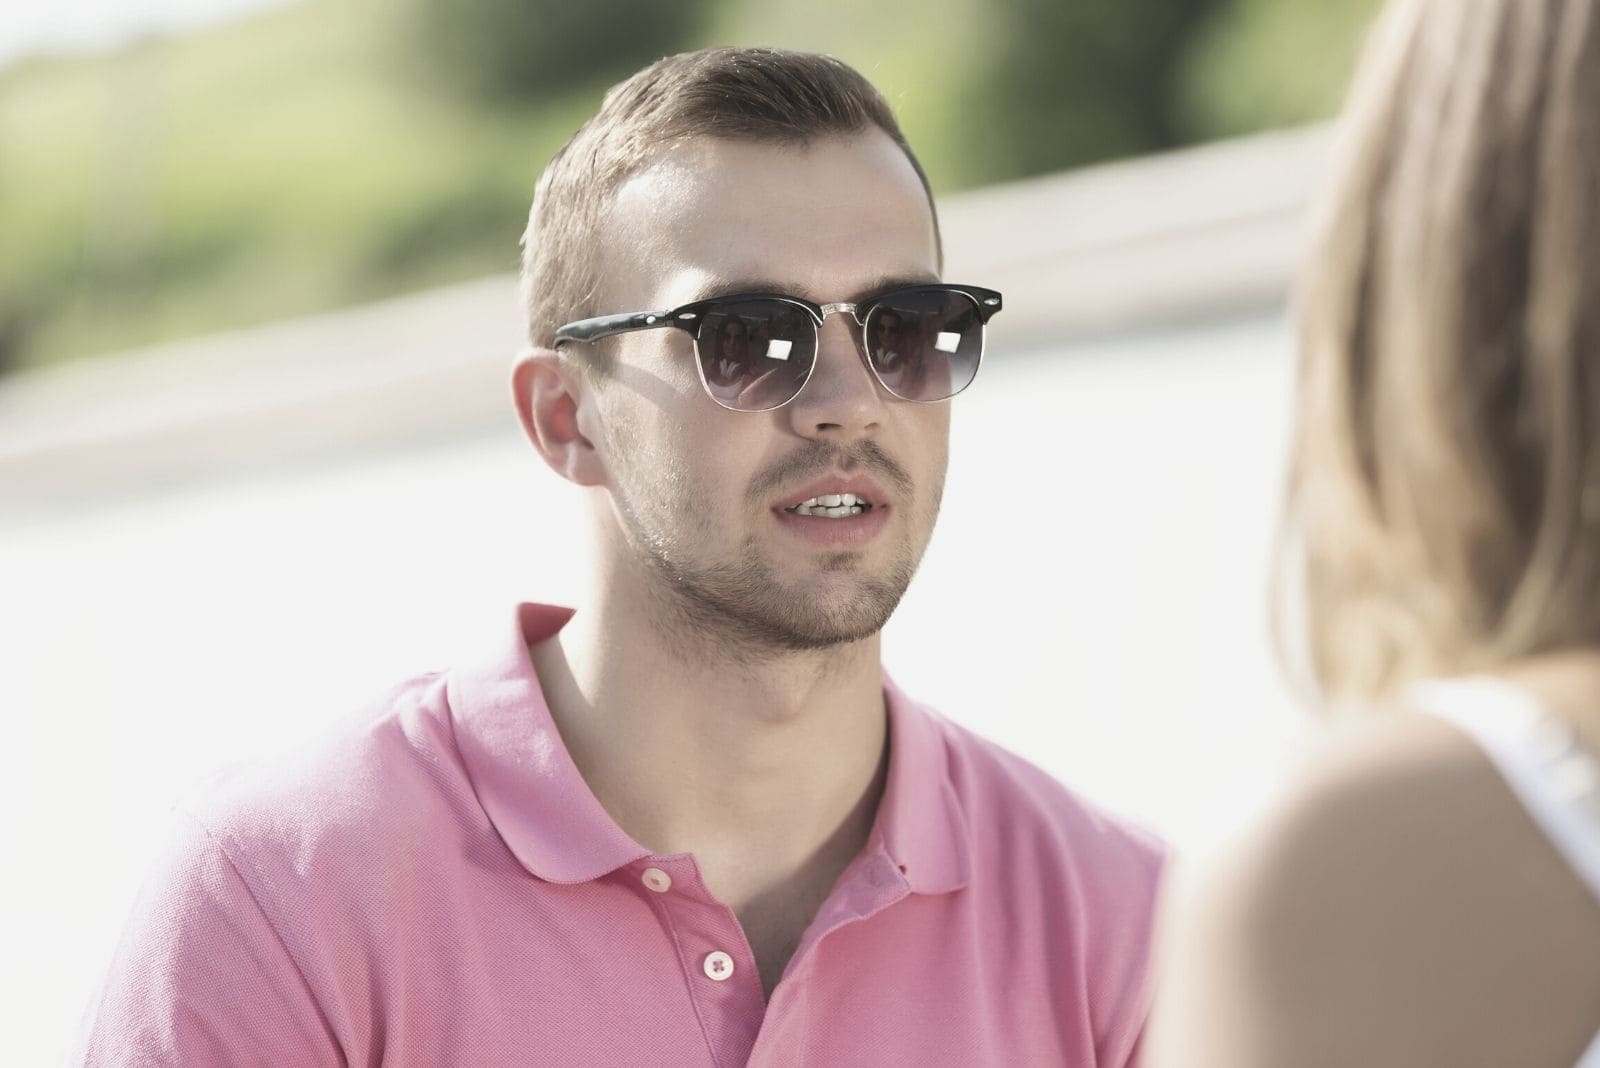 handsome young man wearing pink top and sunglasses talking to a woman outdoors